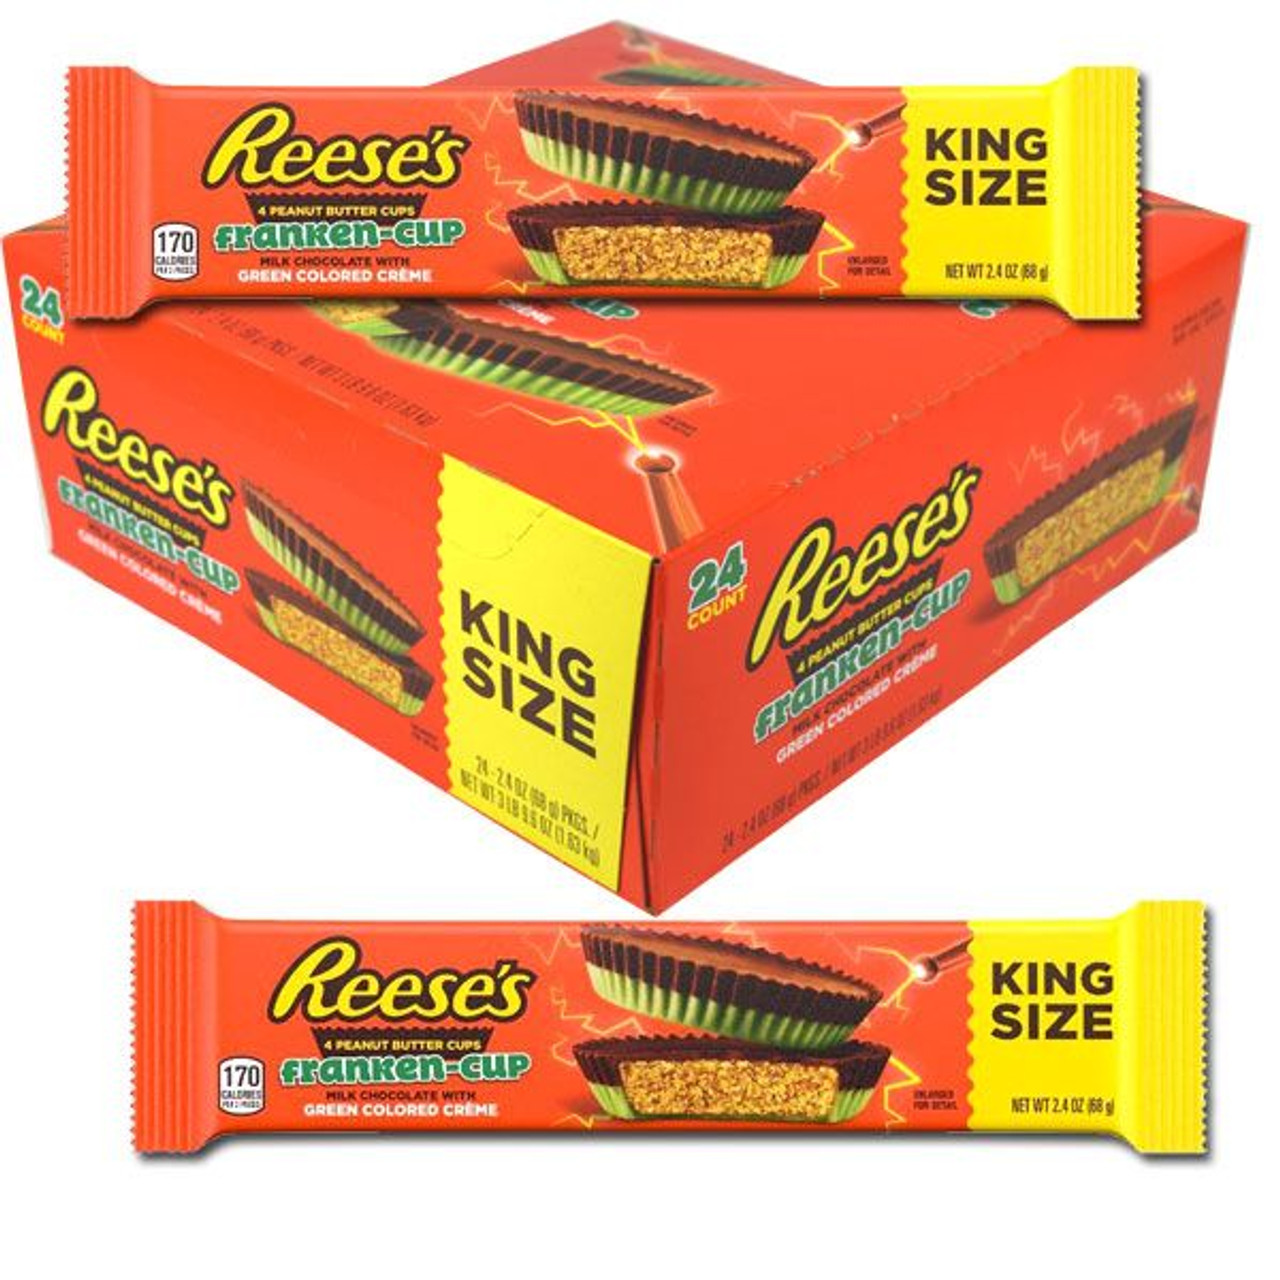 REESE'S Milk Chocolate Peanut Butter King Size Trees, 2.4 oz, 24 count box